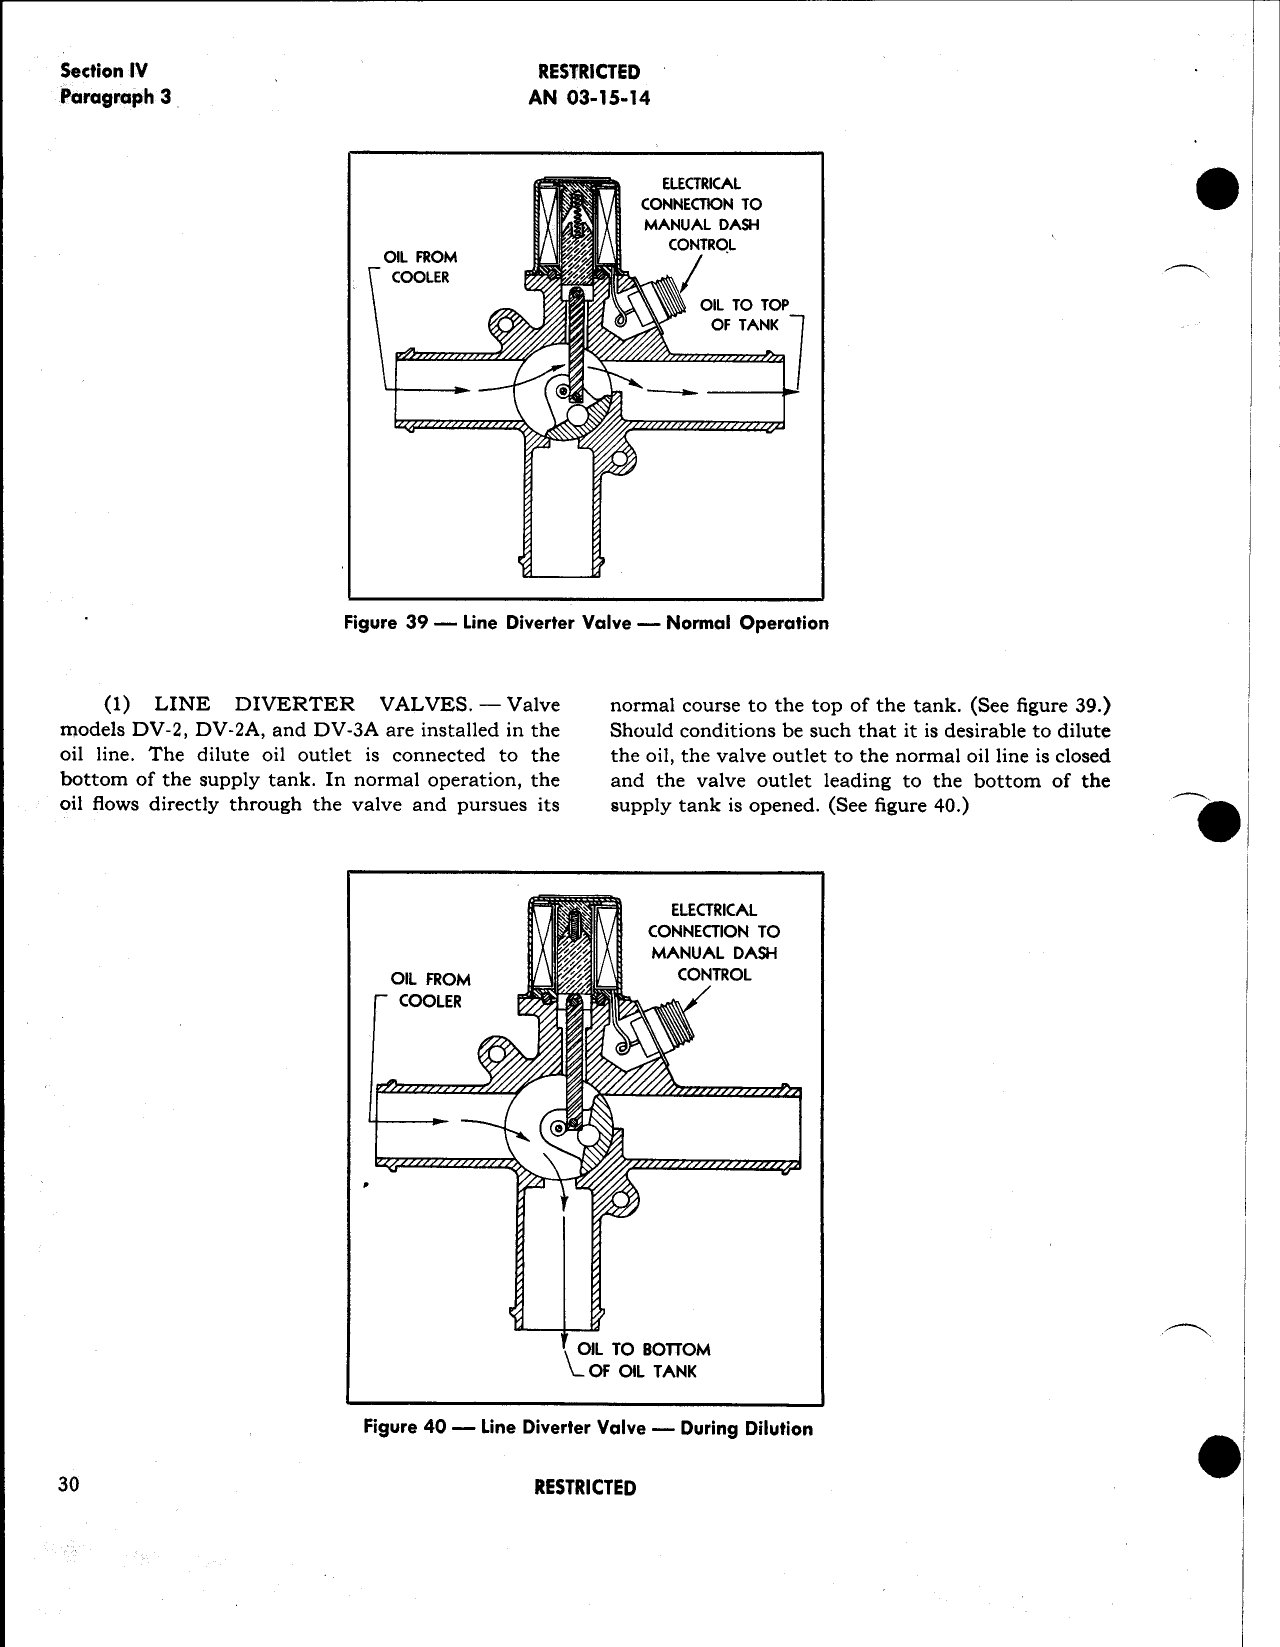 Sample page  24 from AirCorps Library document: Oil Coolers & Control Vales - Instructions w/Parts Catalog